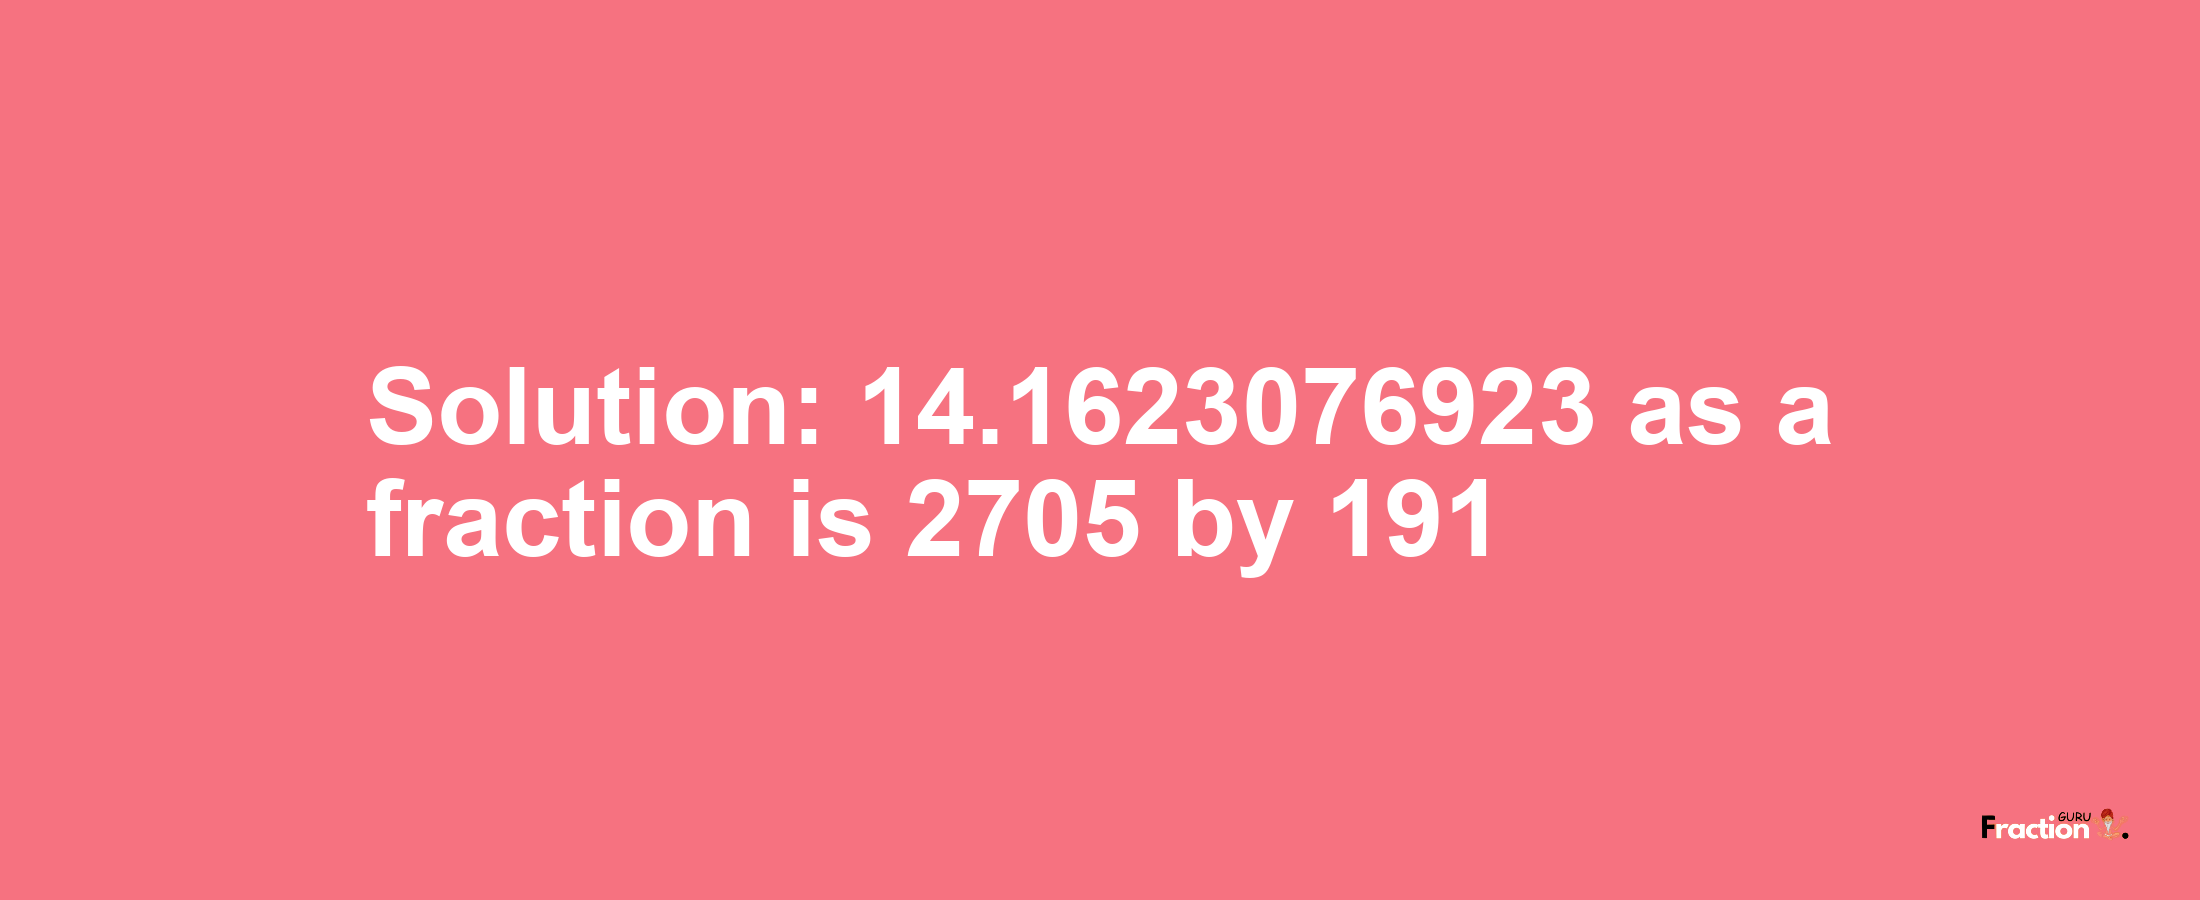 Solution:14.1623076923 as a fraction is 2705/191